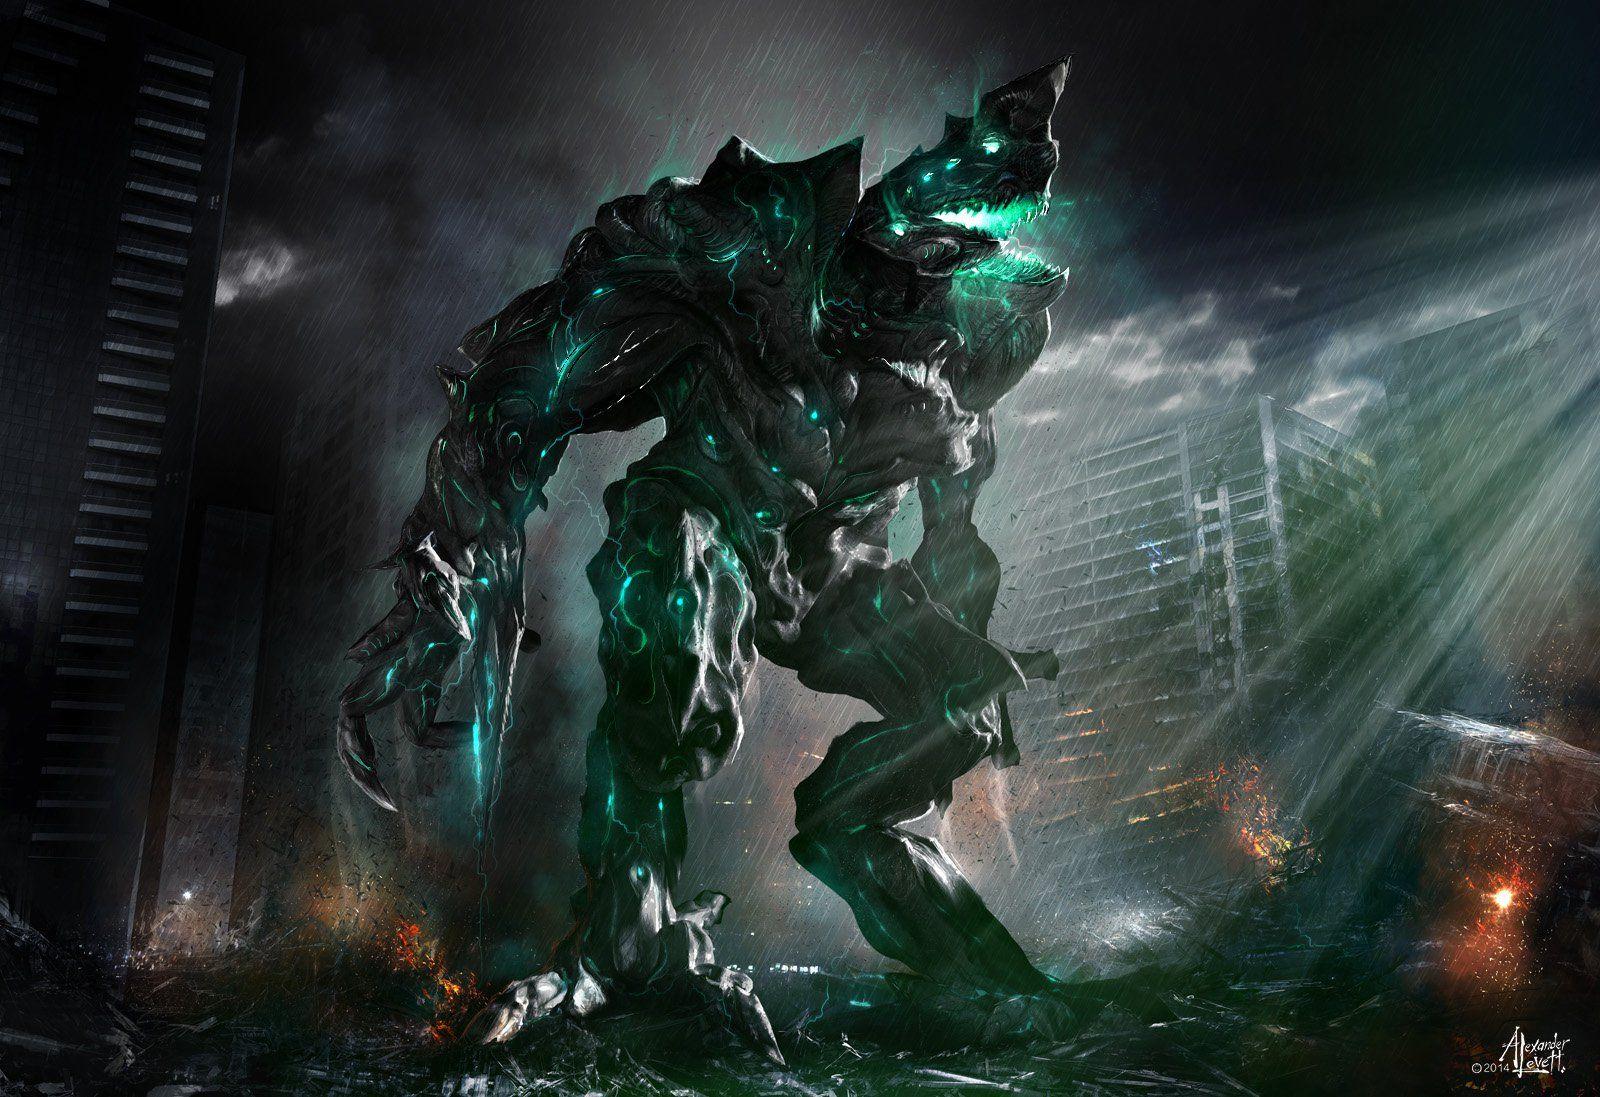 Pacific Rim 2 will see many original characters return, says